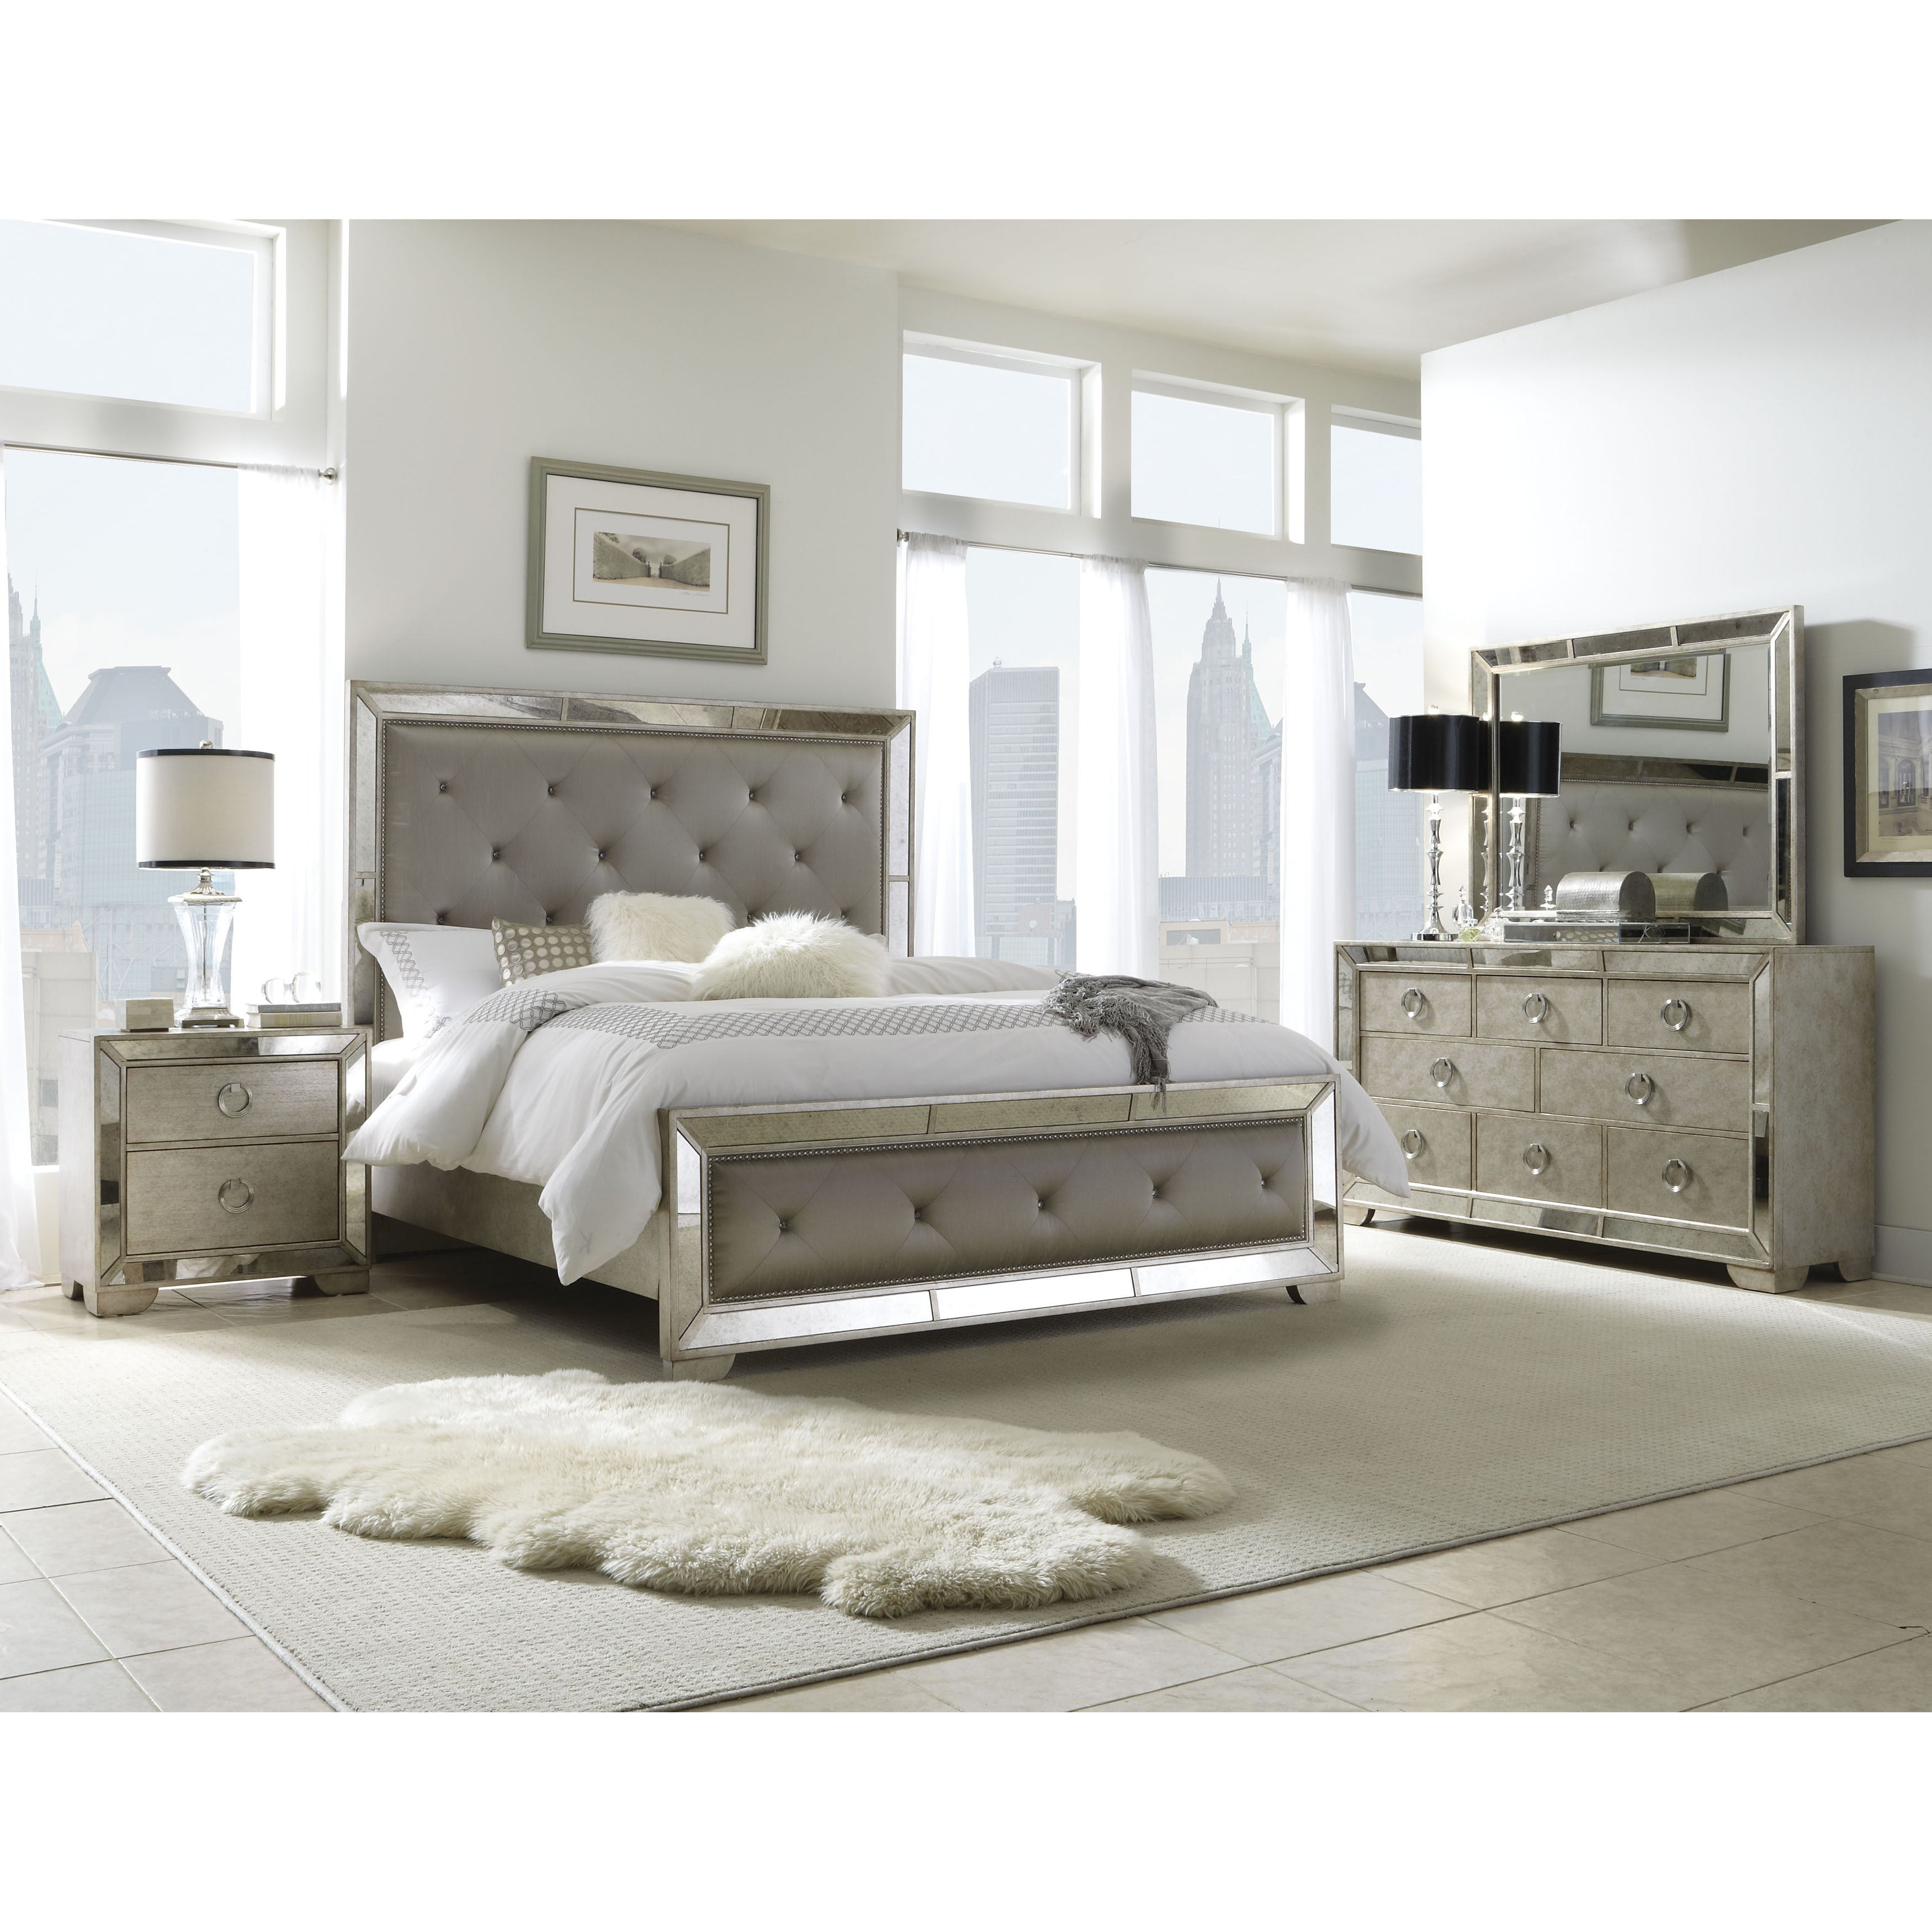 Celine 6 Piece Mirrored And Upholstered Tufted Queen Size Bedroom Set with regard to dimensions 3500 X 3500